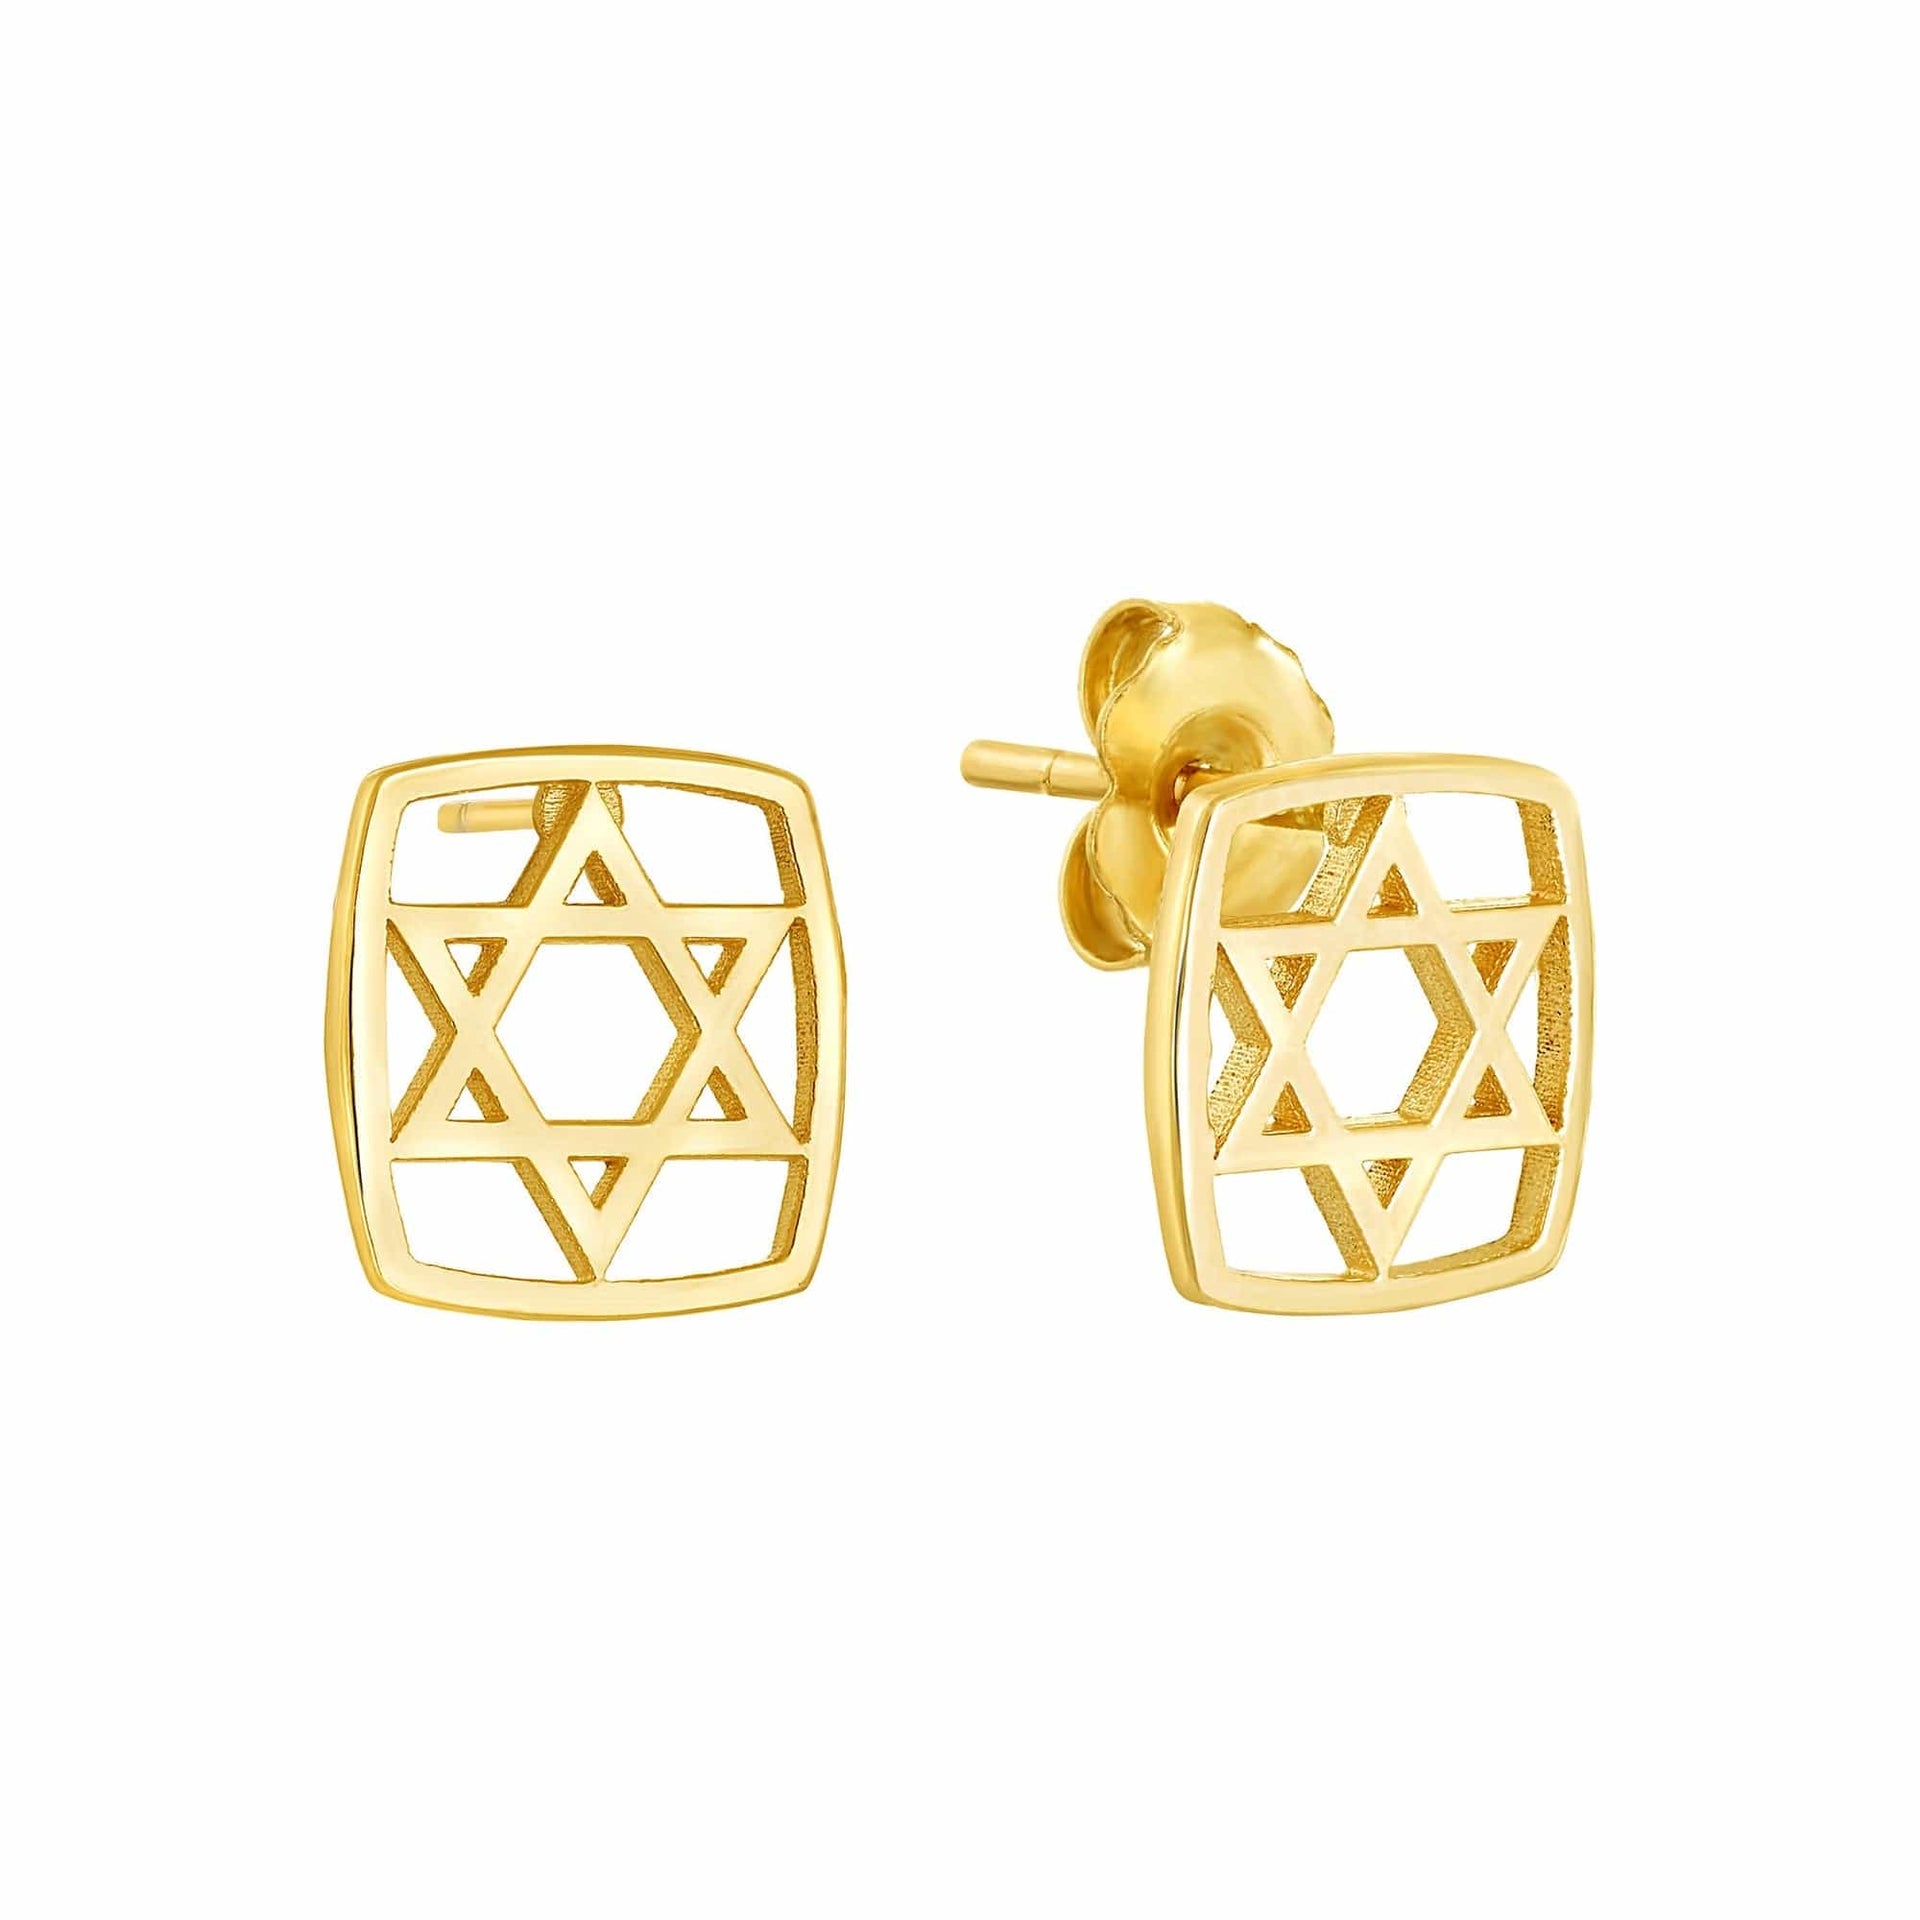 LeahJessicaJewelry Necklaces Magen David Ahava Earrings by Leah Jessica